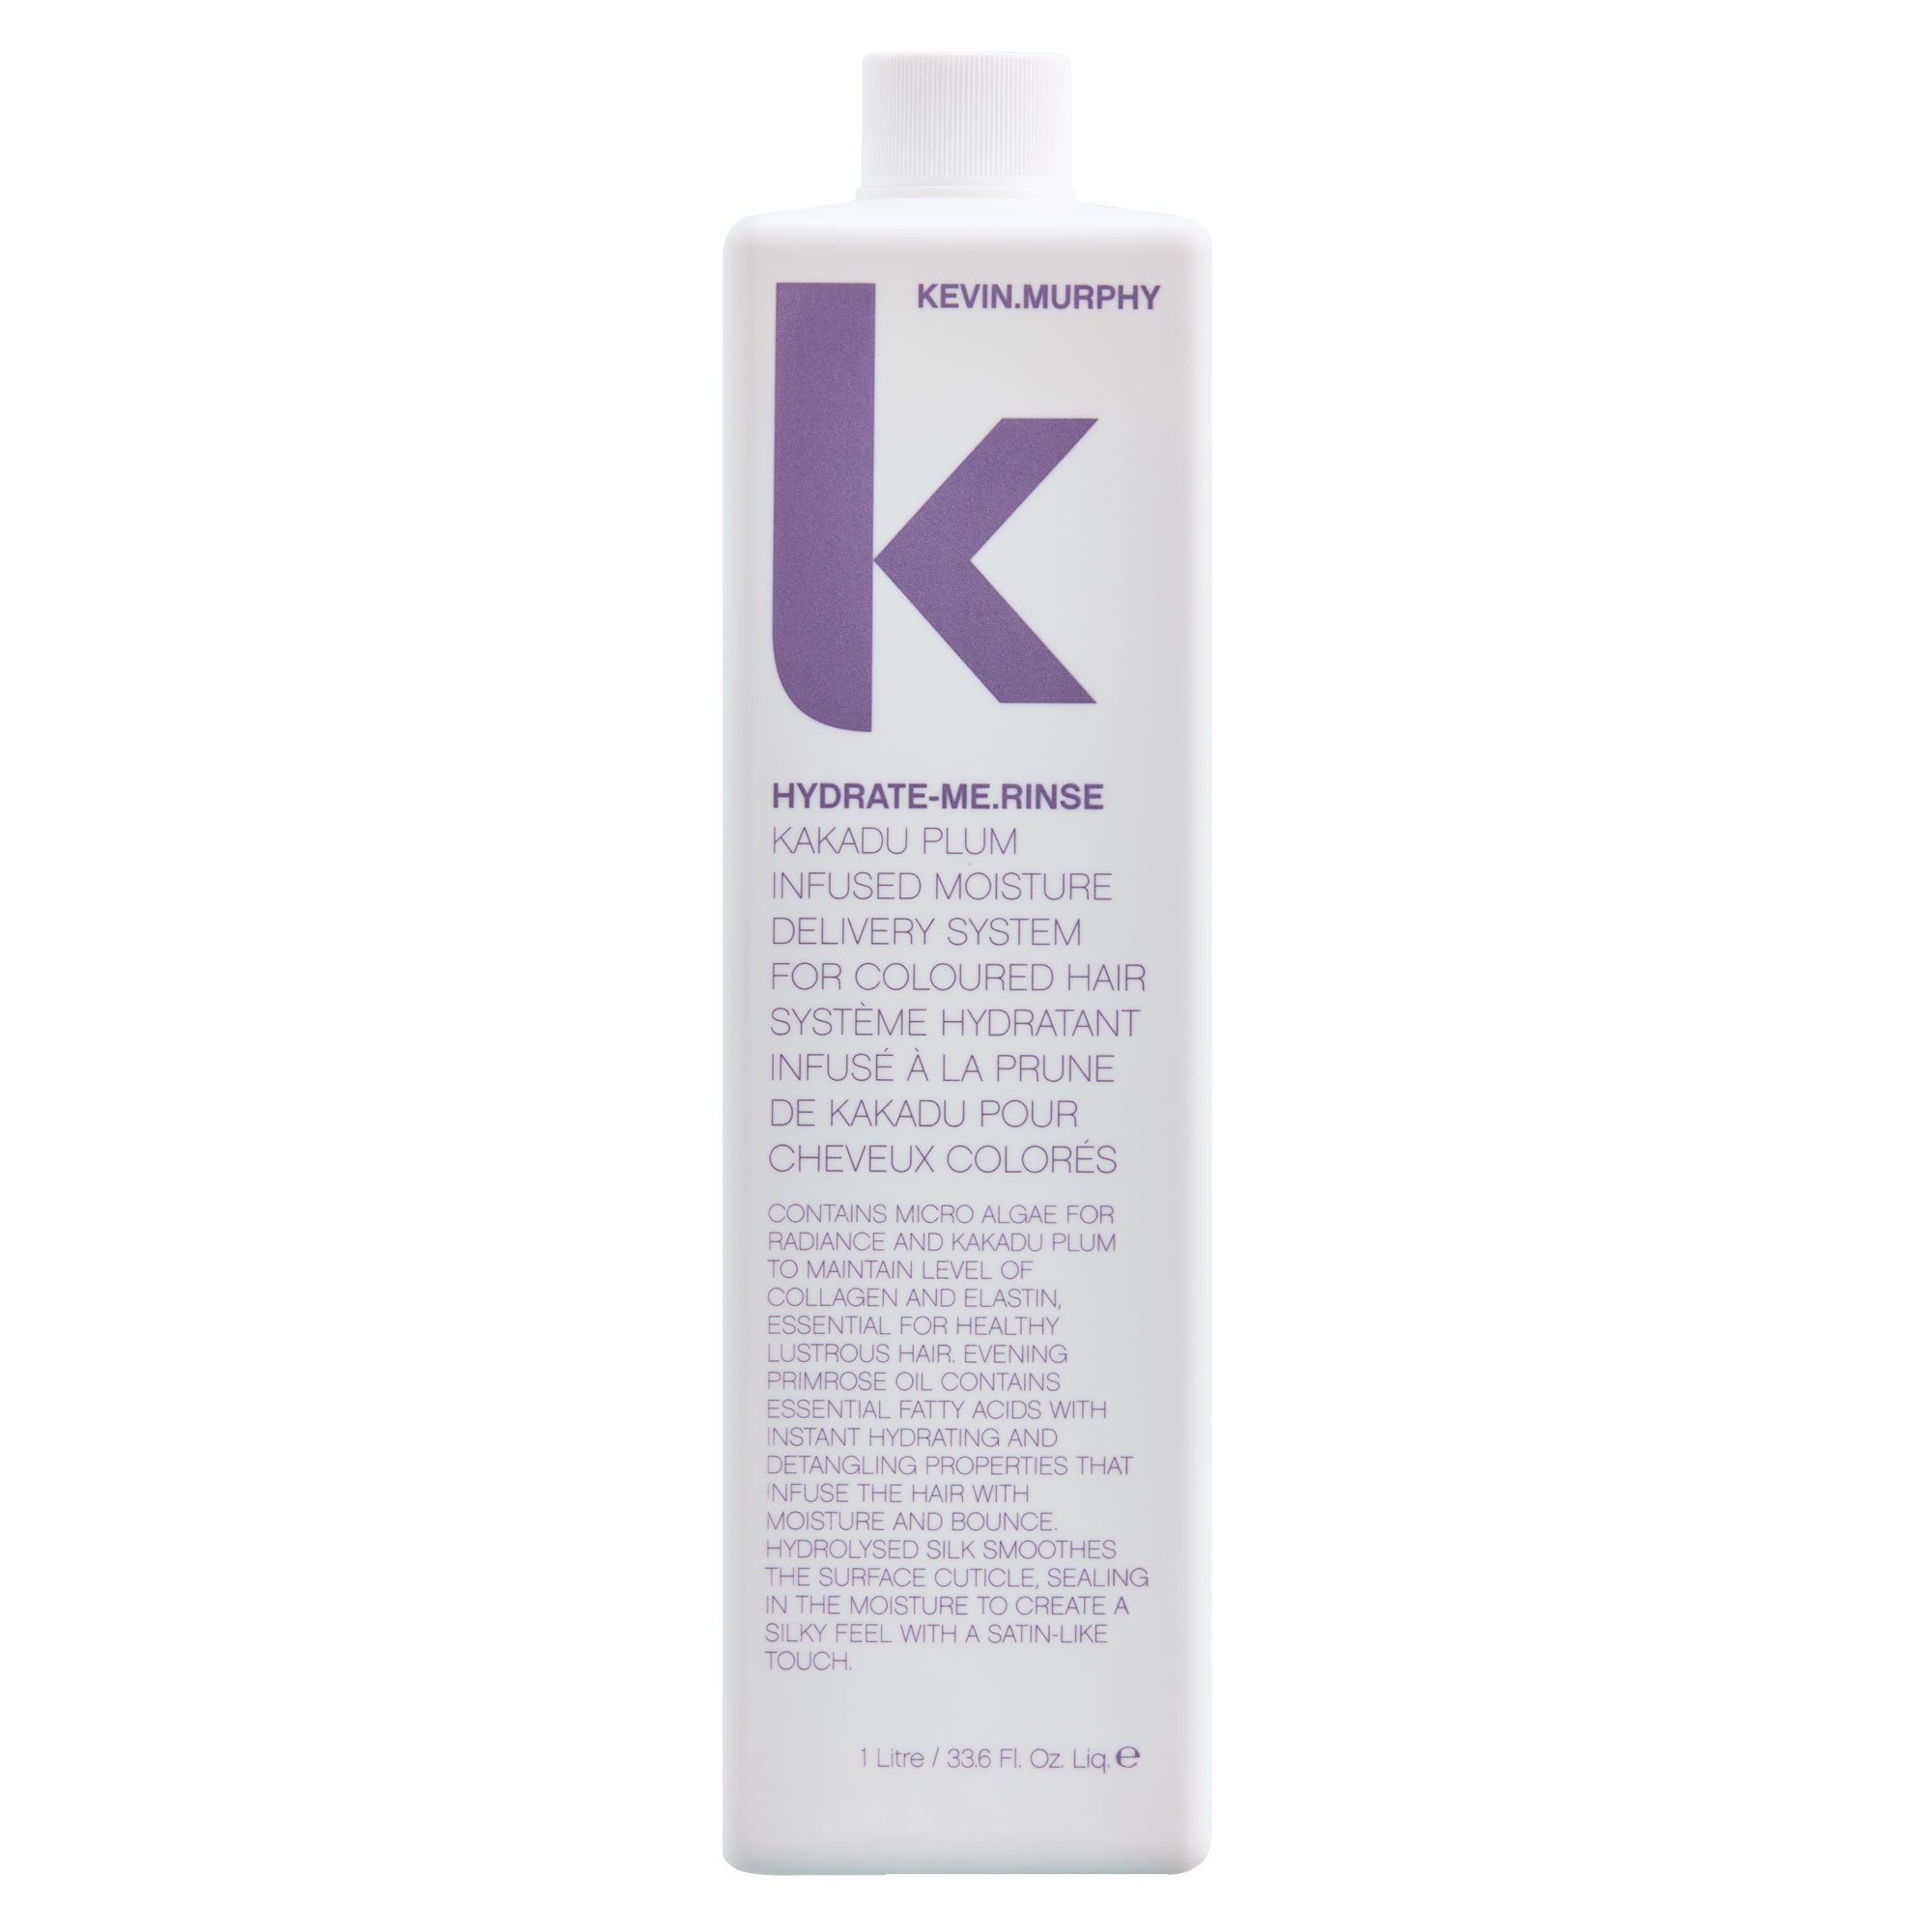 KEVIN.MURPHY HYDRATE.ME RINSE